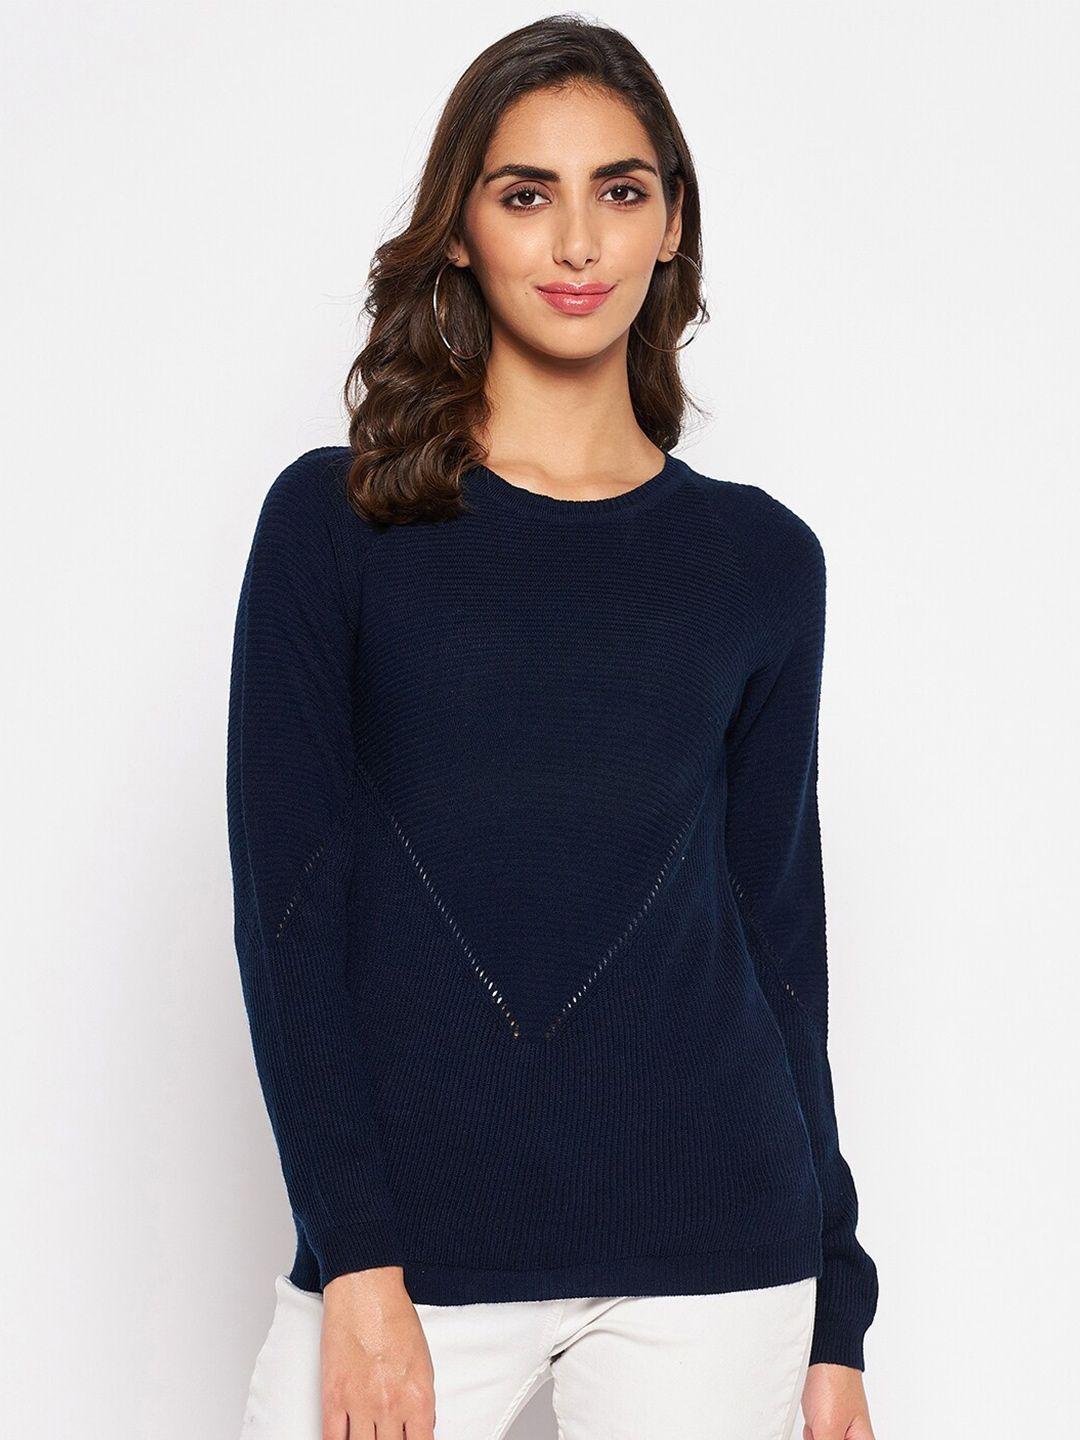 crozo-by-cantabil-women-navy-blue-&-white-ribbed-acrylic-pullover